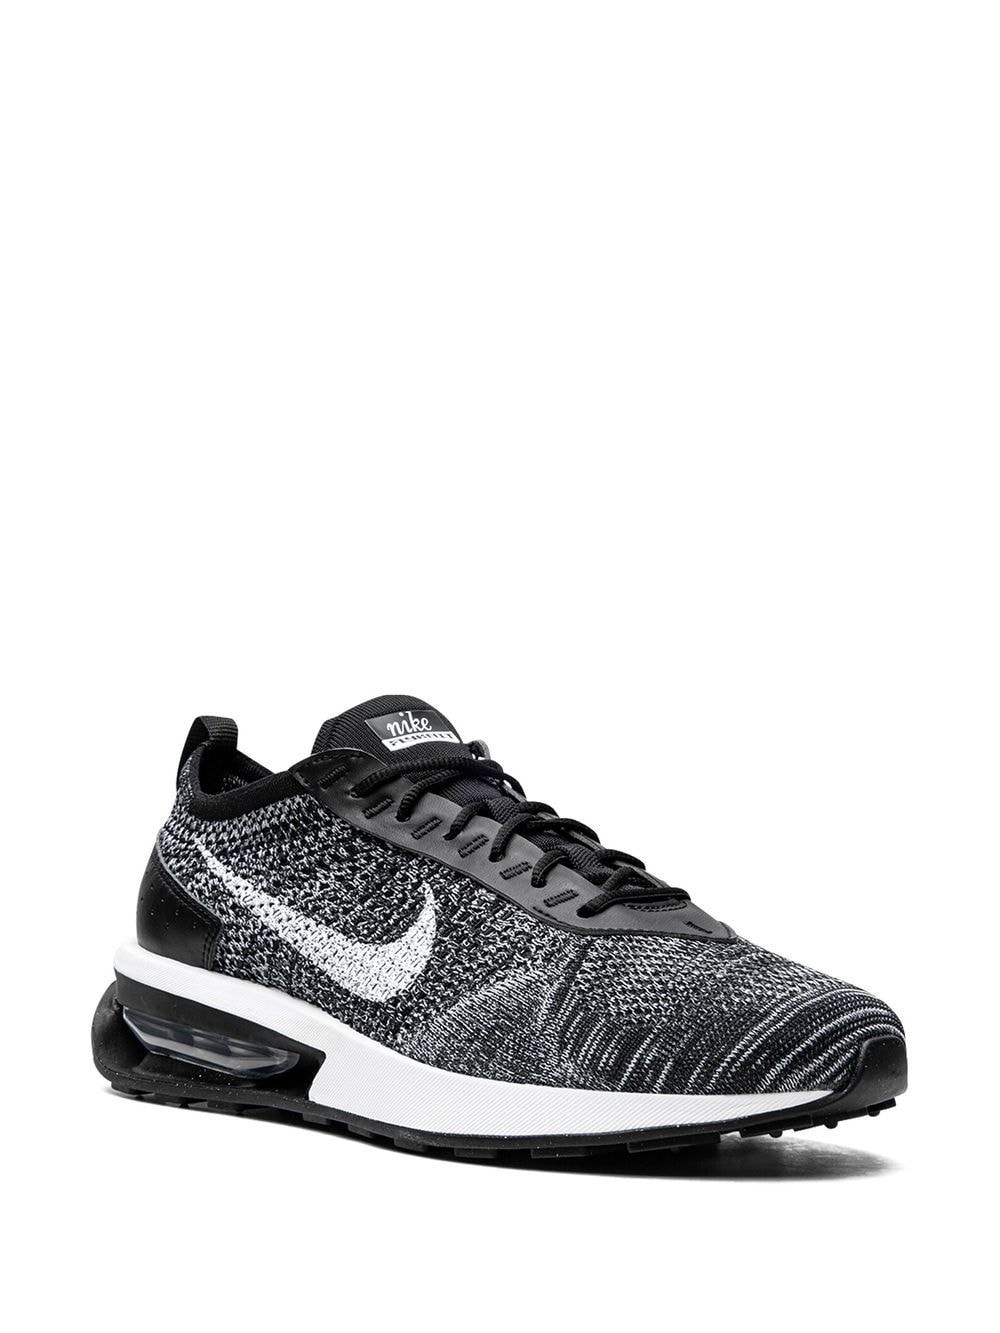 Air Max Flyknit Racer "Oreo" sneakers - 2